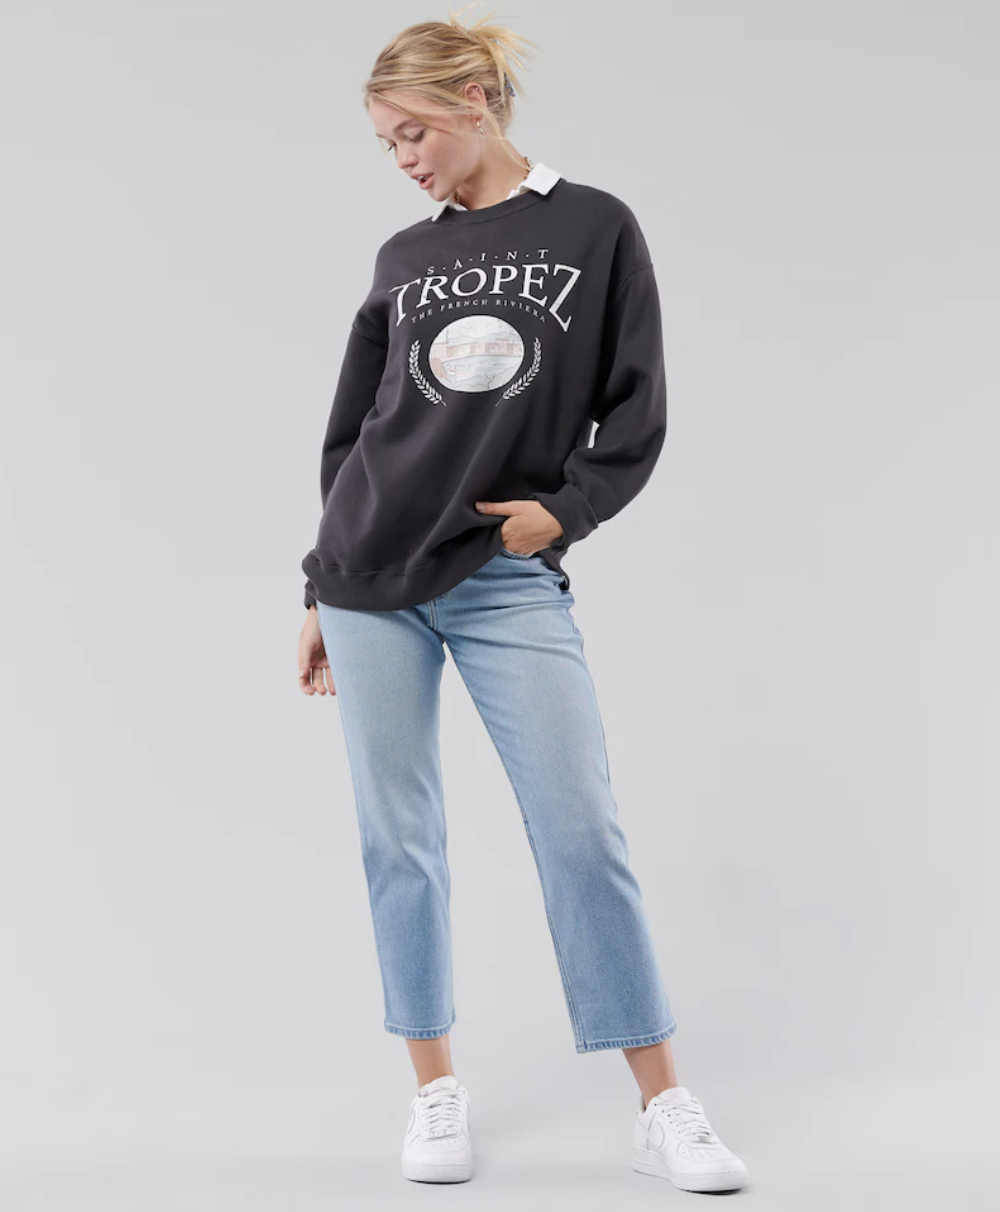 Hollister Have 25% Off Selected Jeans Right Now